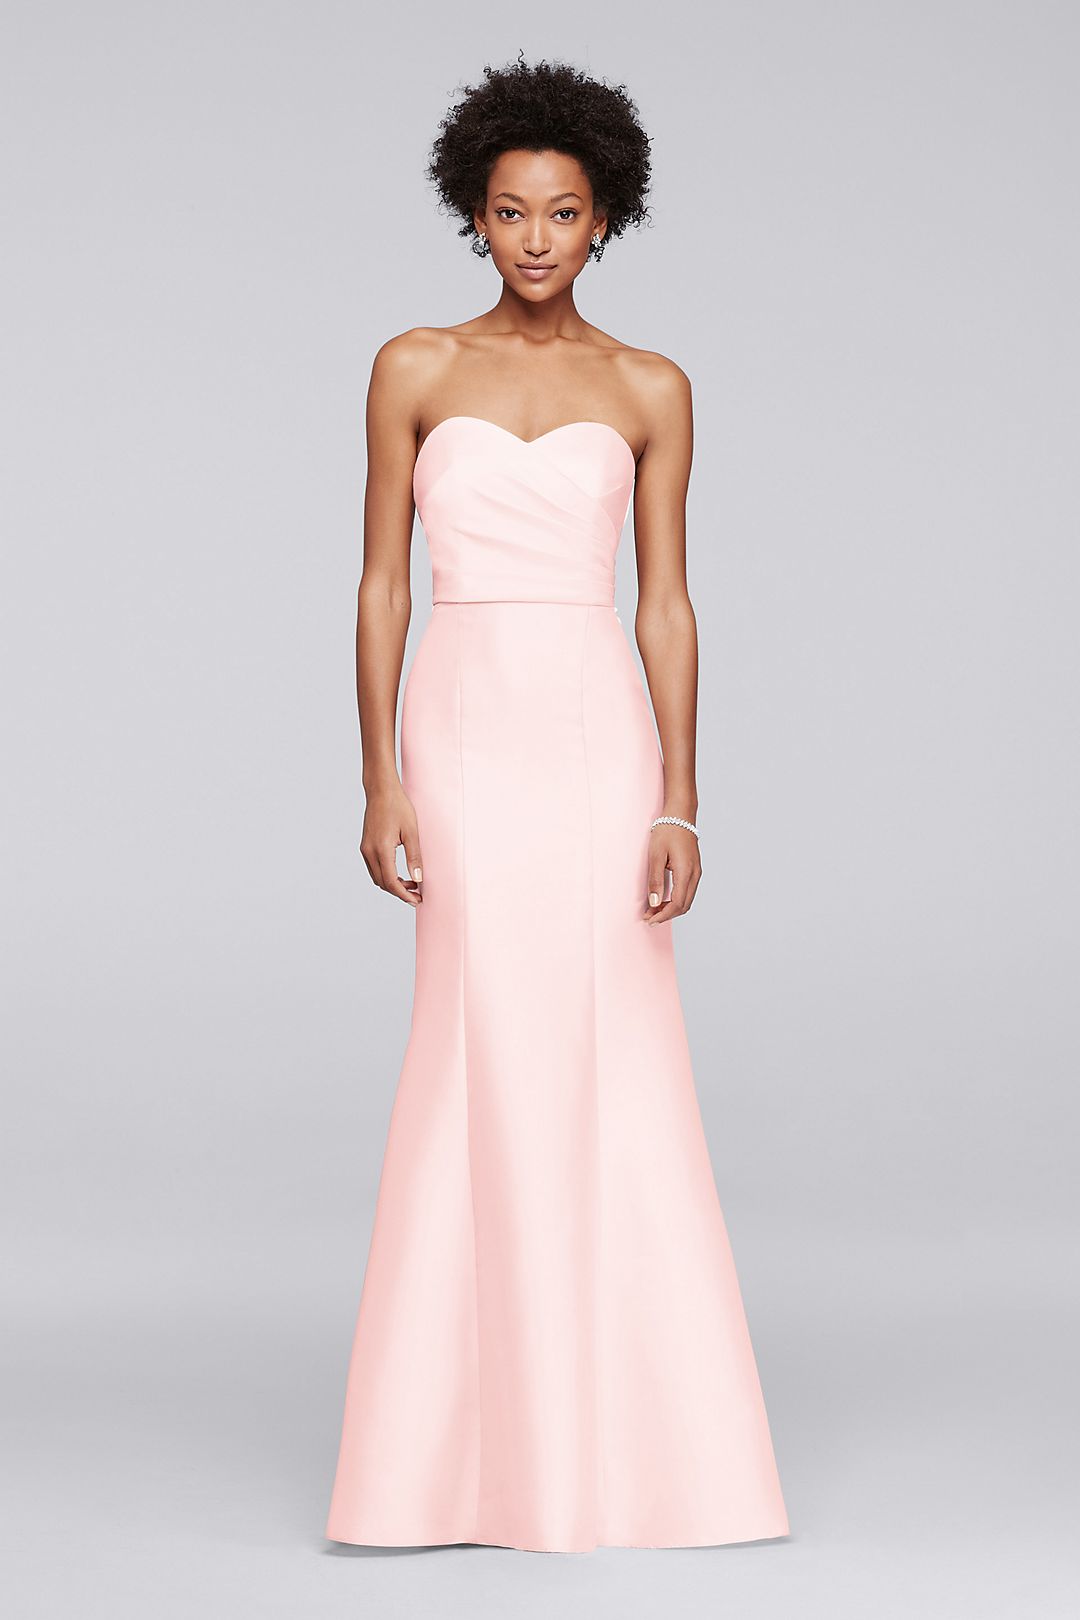 Structured Mikado Strapless Long Bridesmaid Dress Image 1